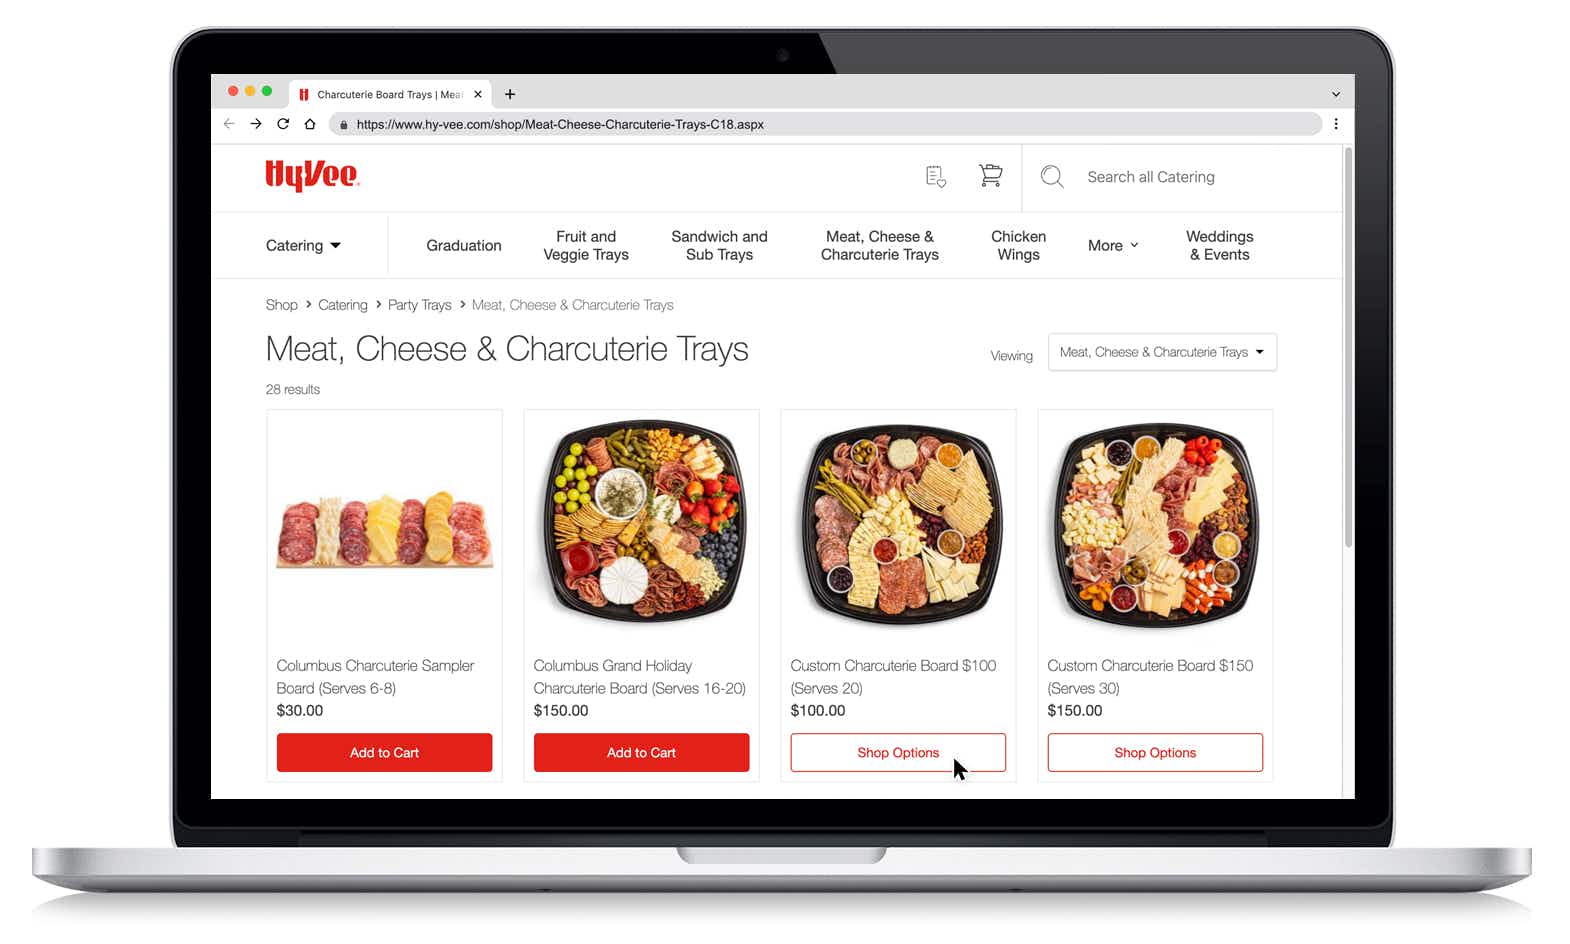 hy-vee-catering-charcuterie-trays-laptop-screenshot-1